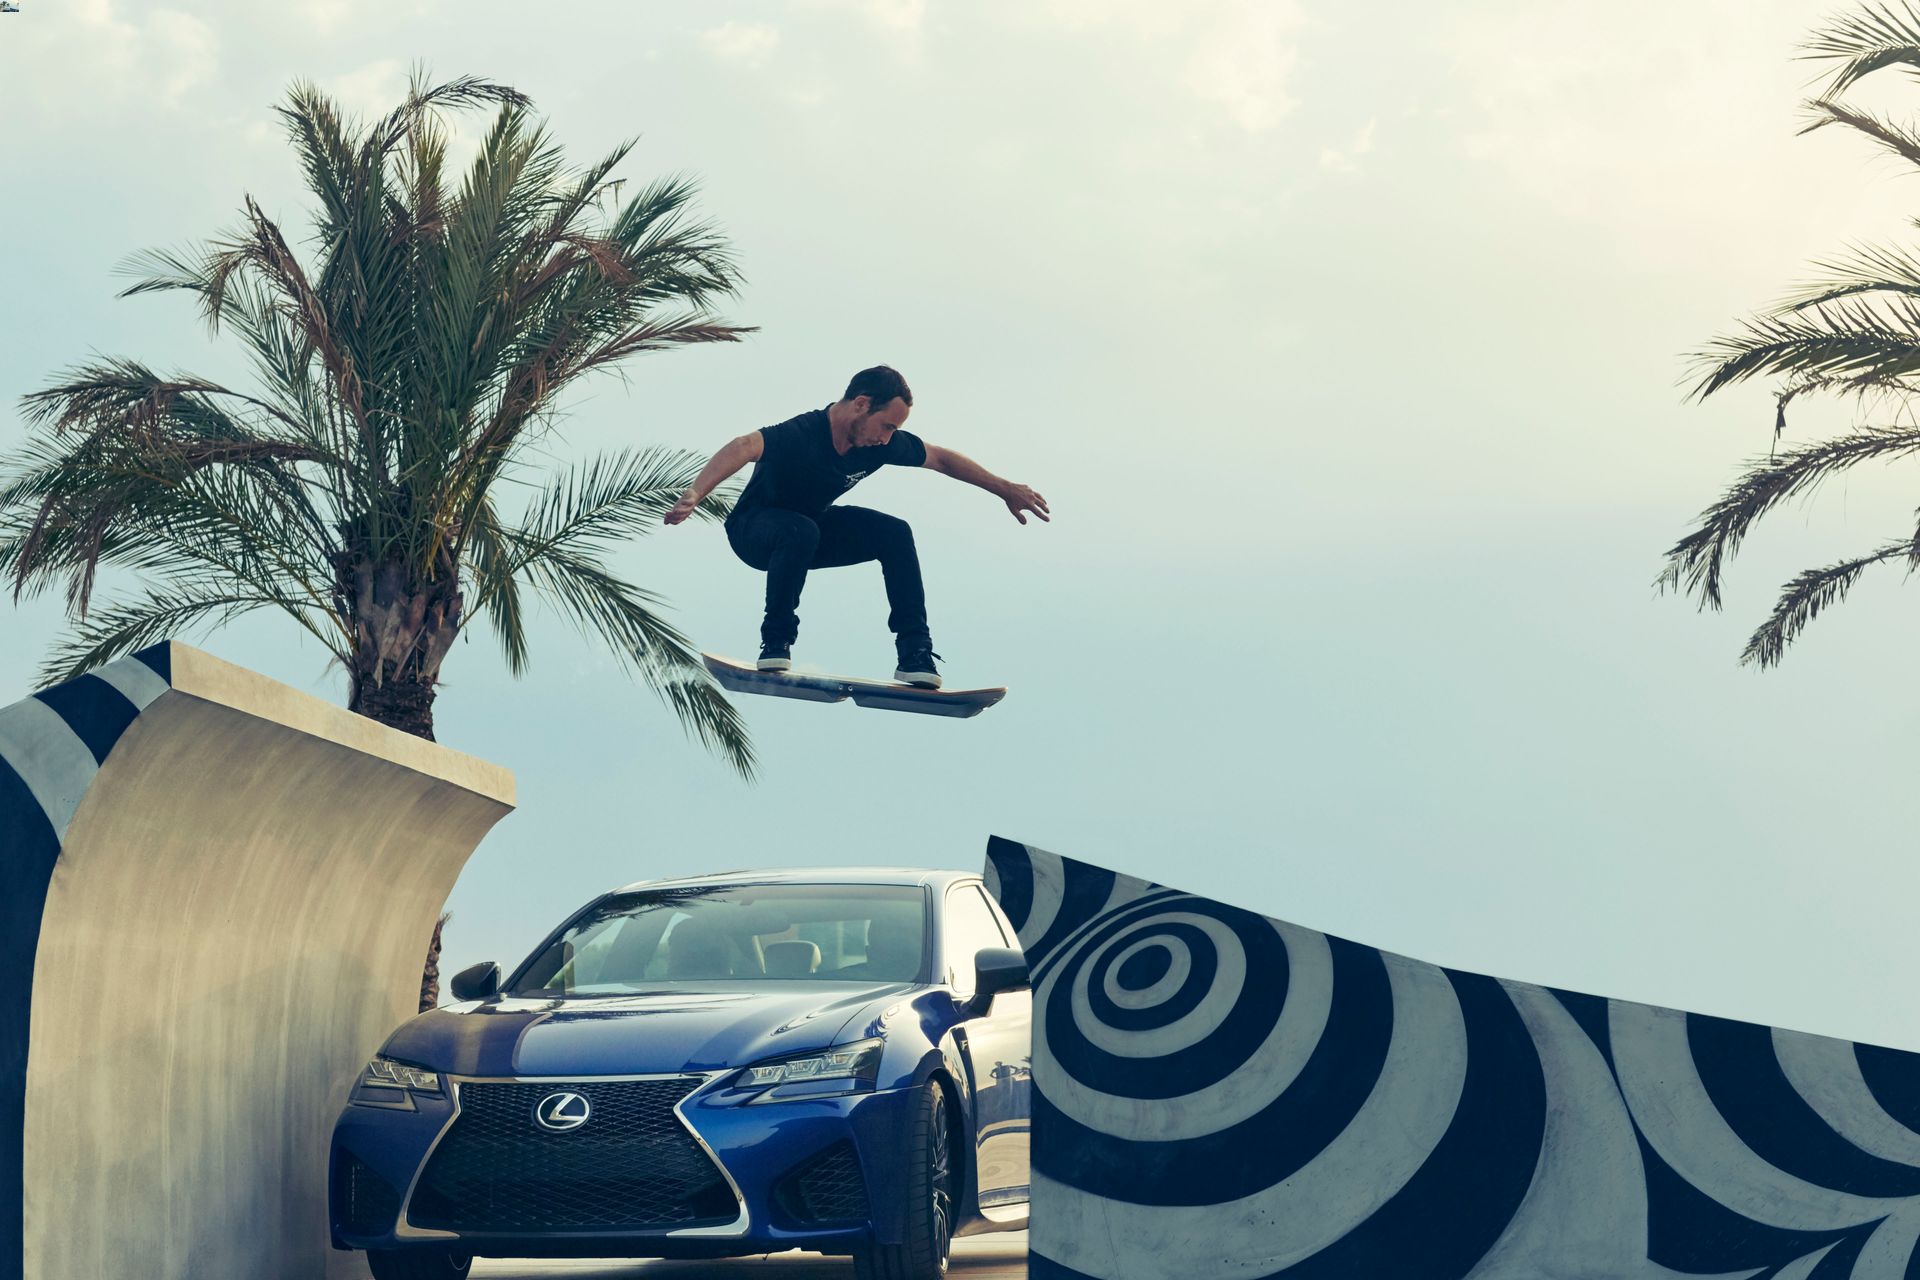 10-tech-stories-you-missed-this-week-lexus-hoverboard-unveiled-jon-stewart-signs-off